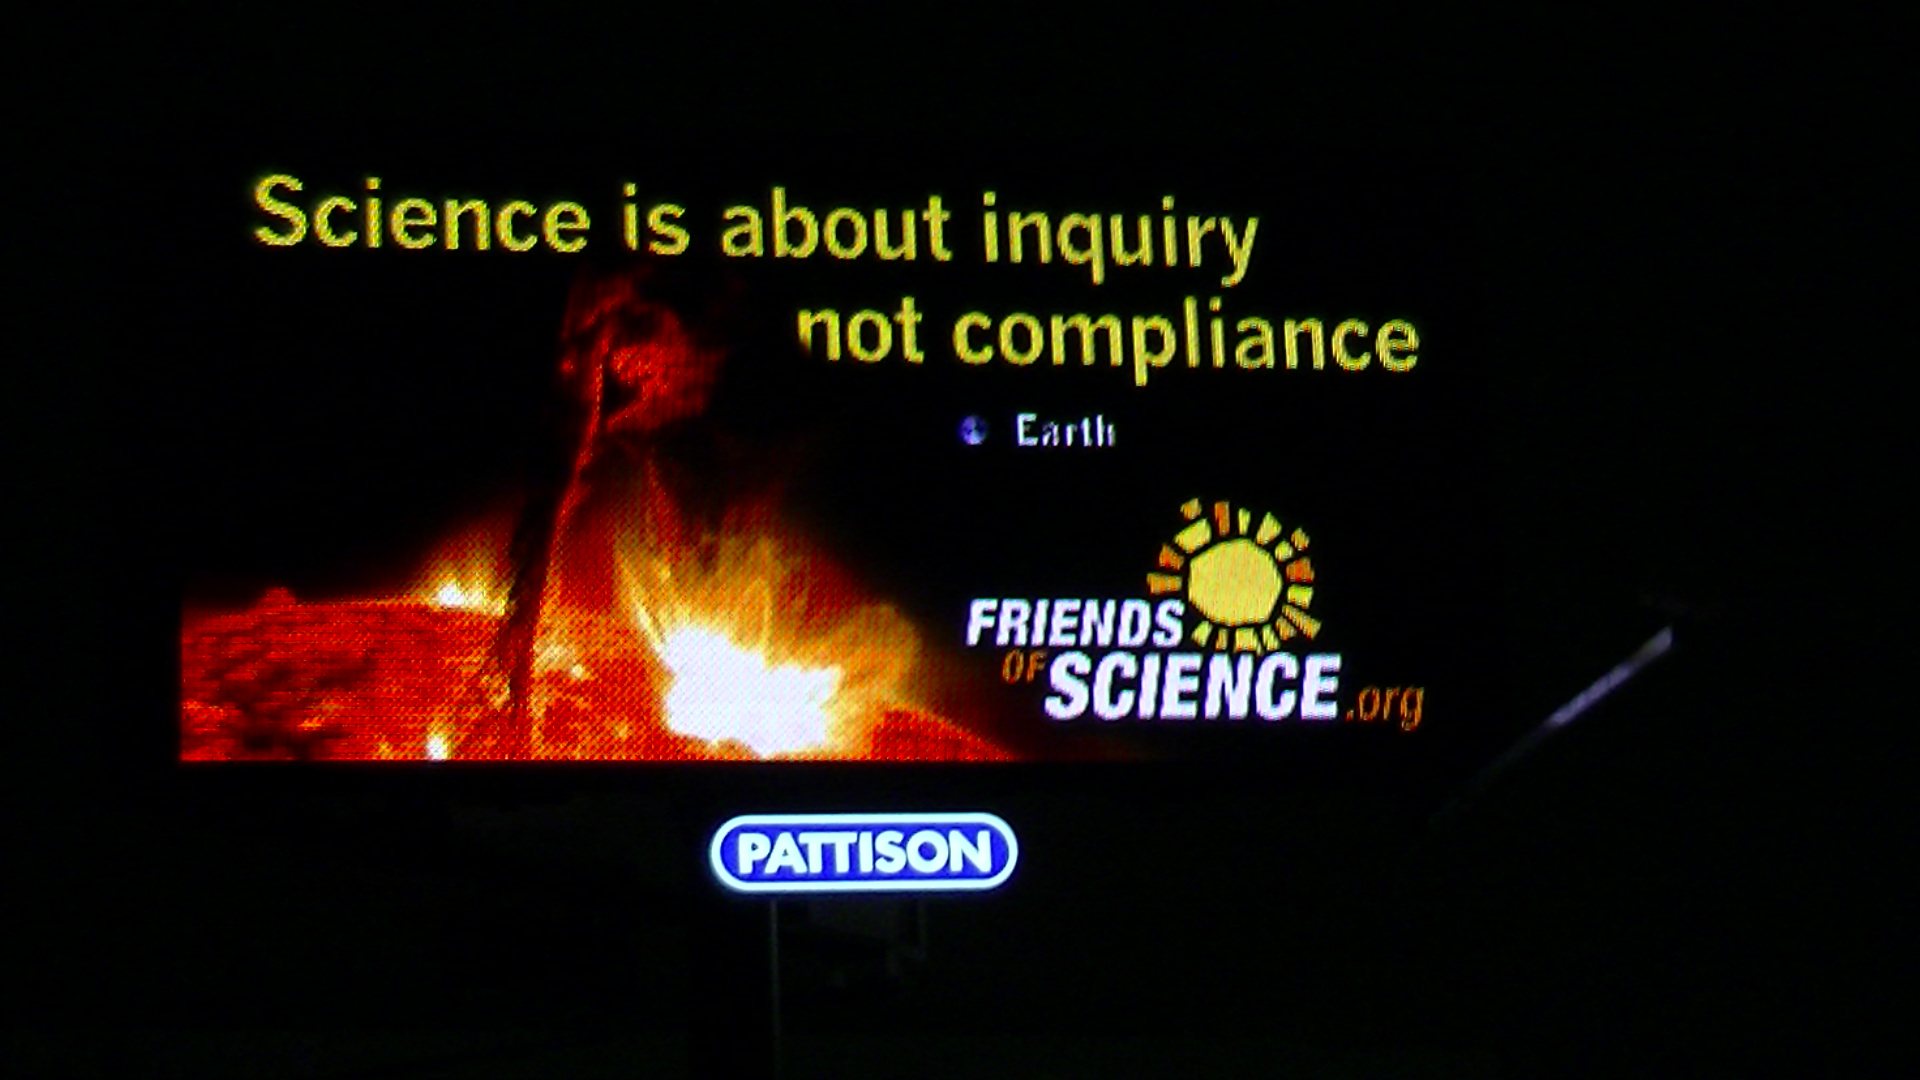 Science is about inquiry, not compliance.